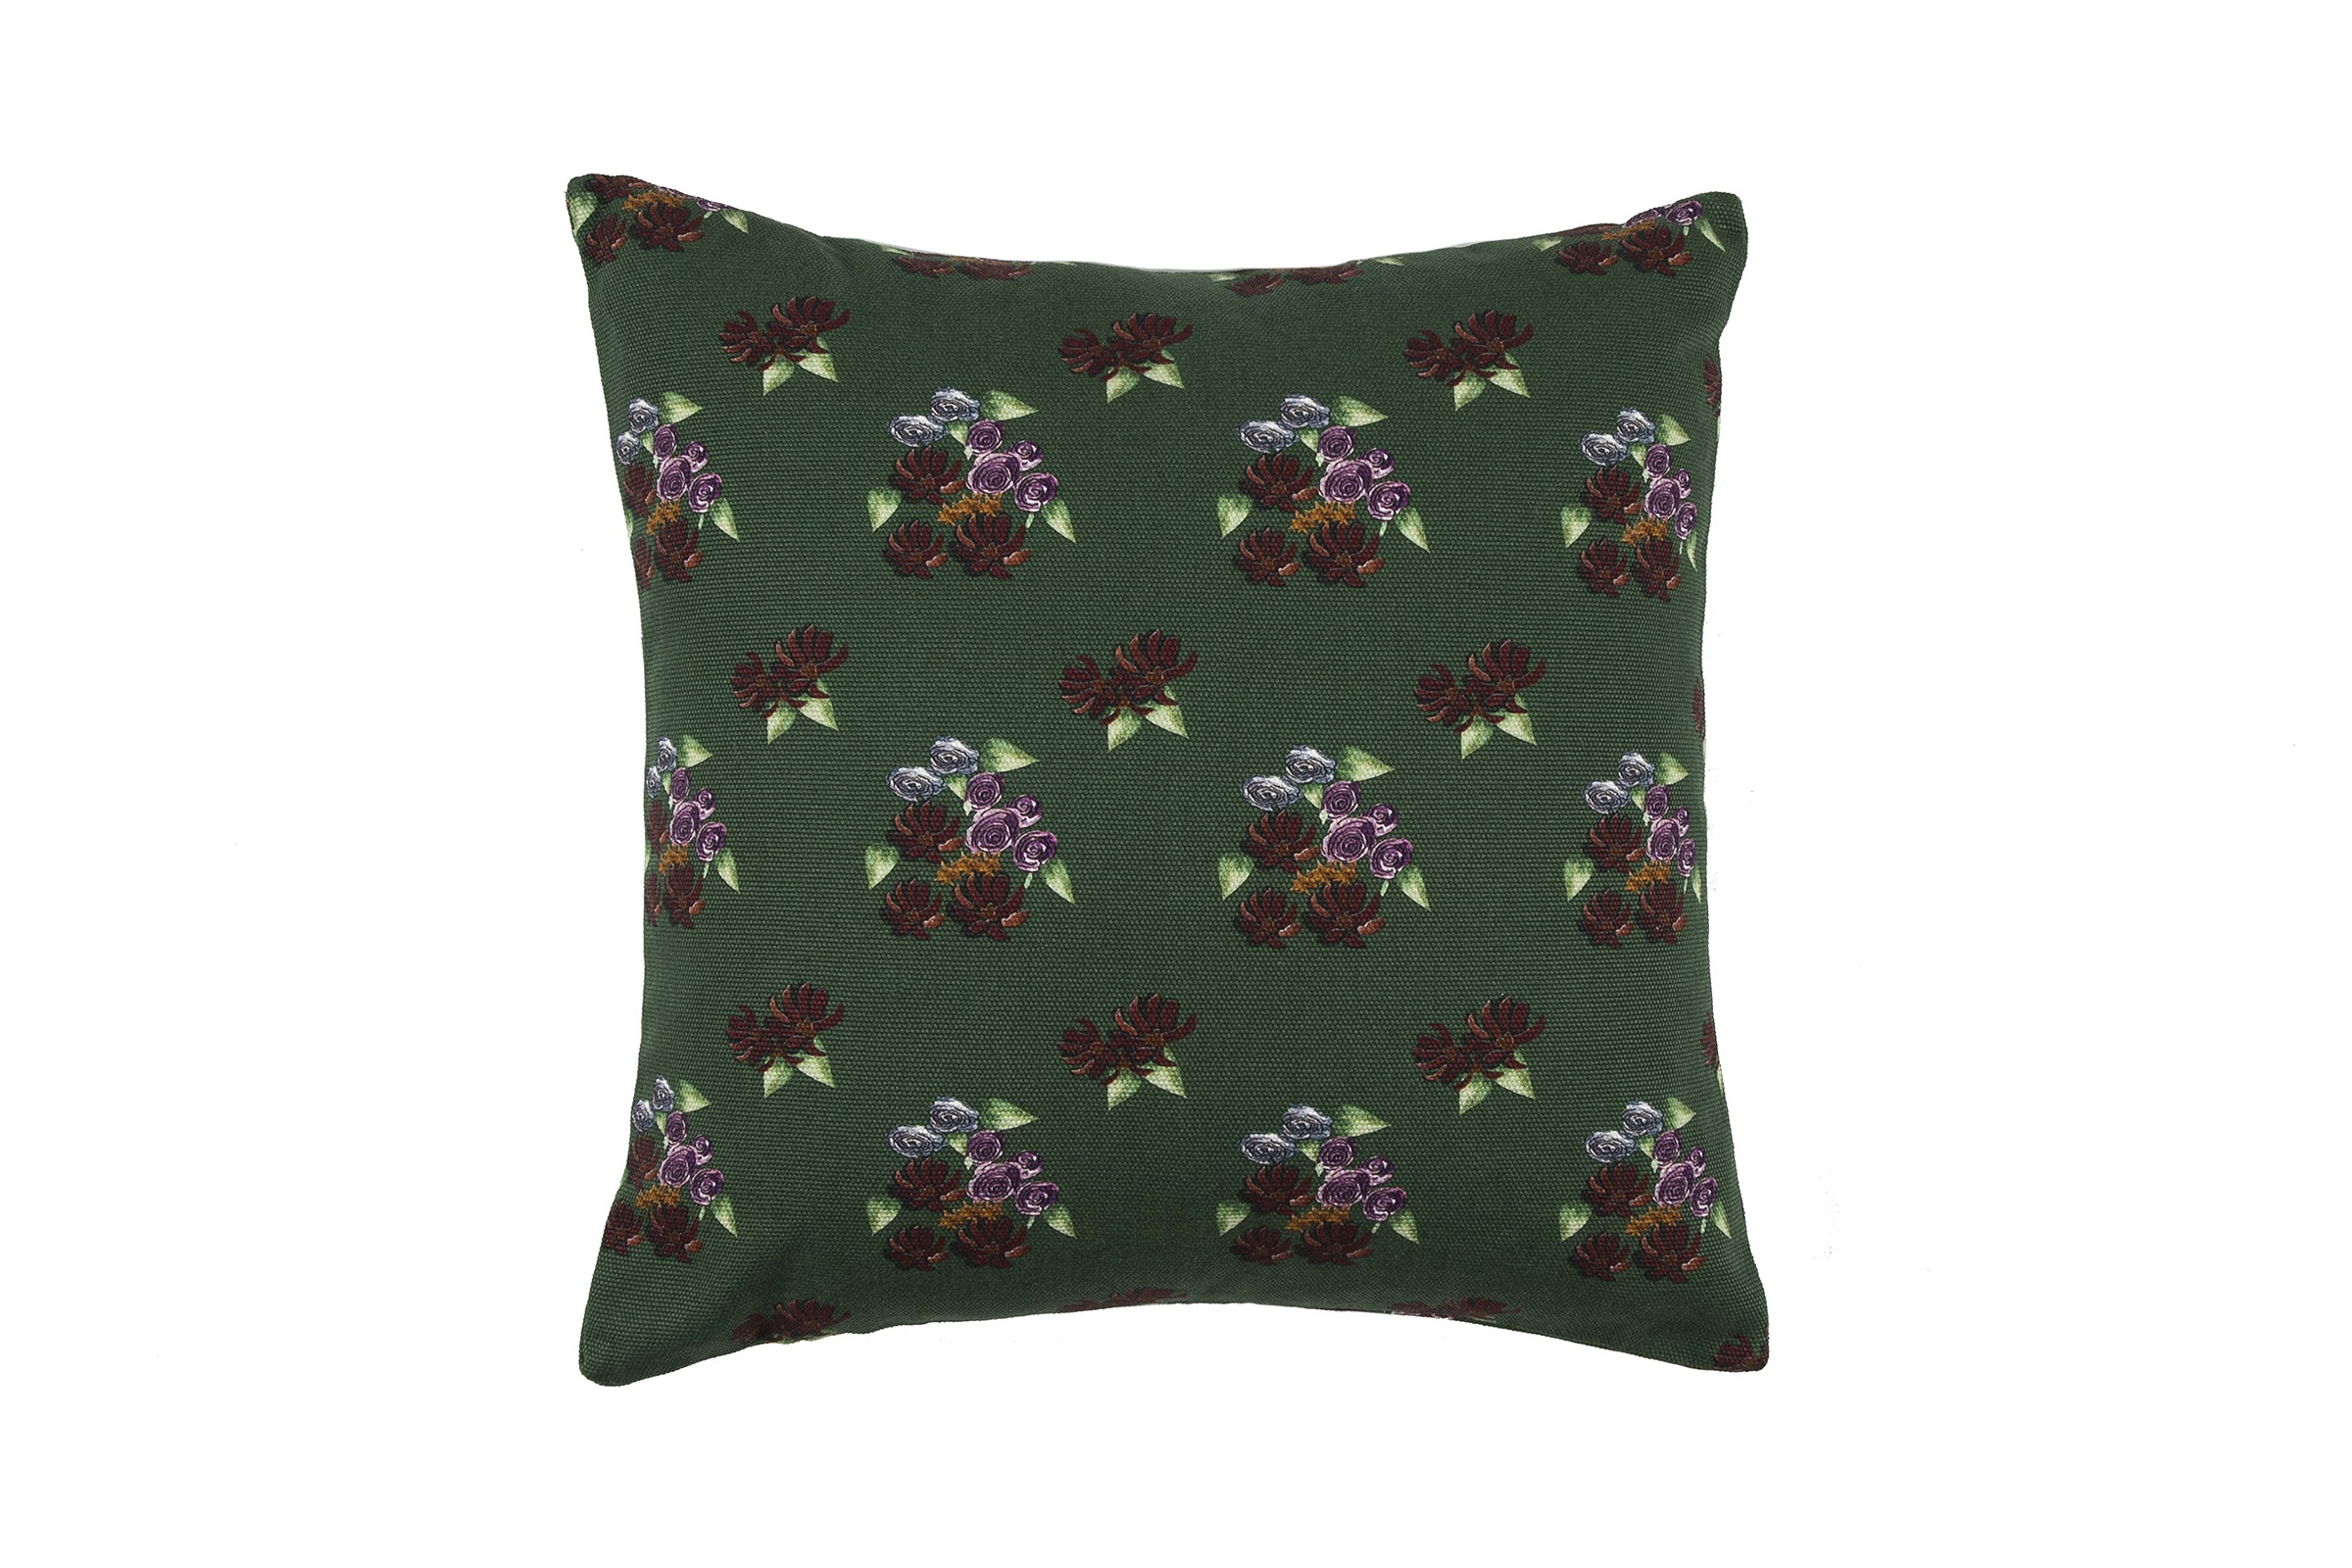 cushion cover;
Vintage roses